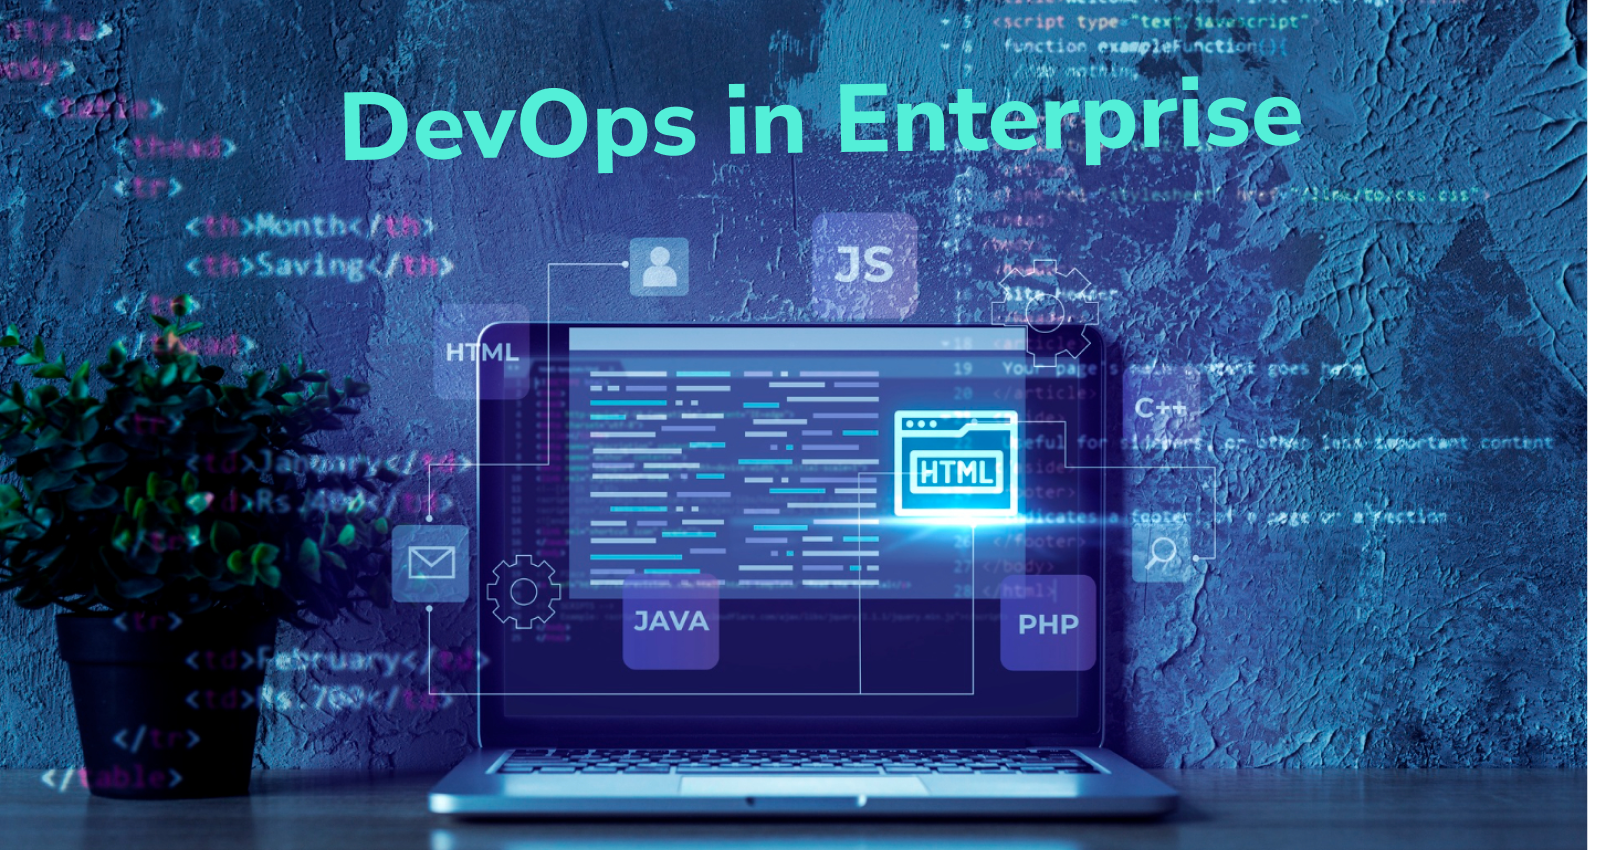 DevOps in Enterprise, Improved Business Productivity and Performance